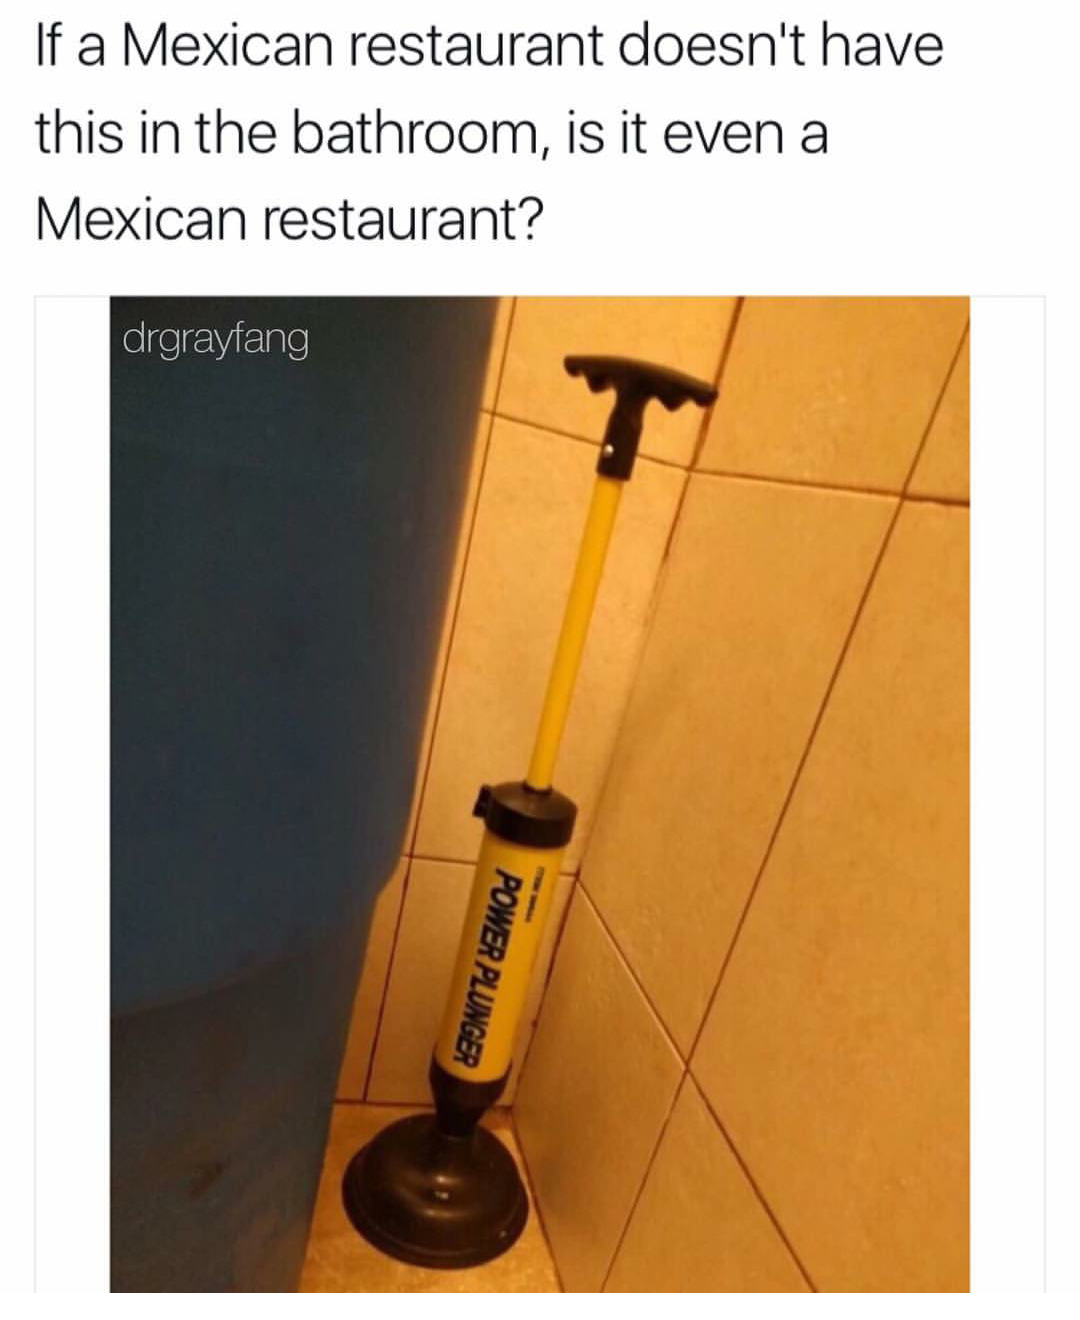 meme - mexican memes dank - If a Mexican restaurant doesn't have this in the bathroom, is it even a Mexican restaurant? drgrayfang Power Plunger